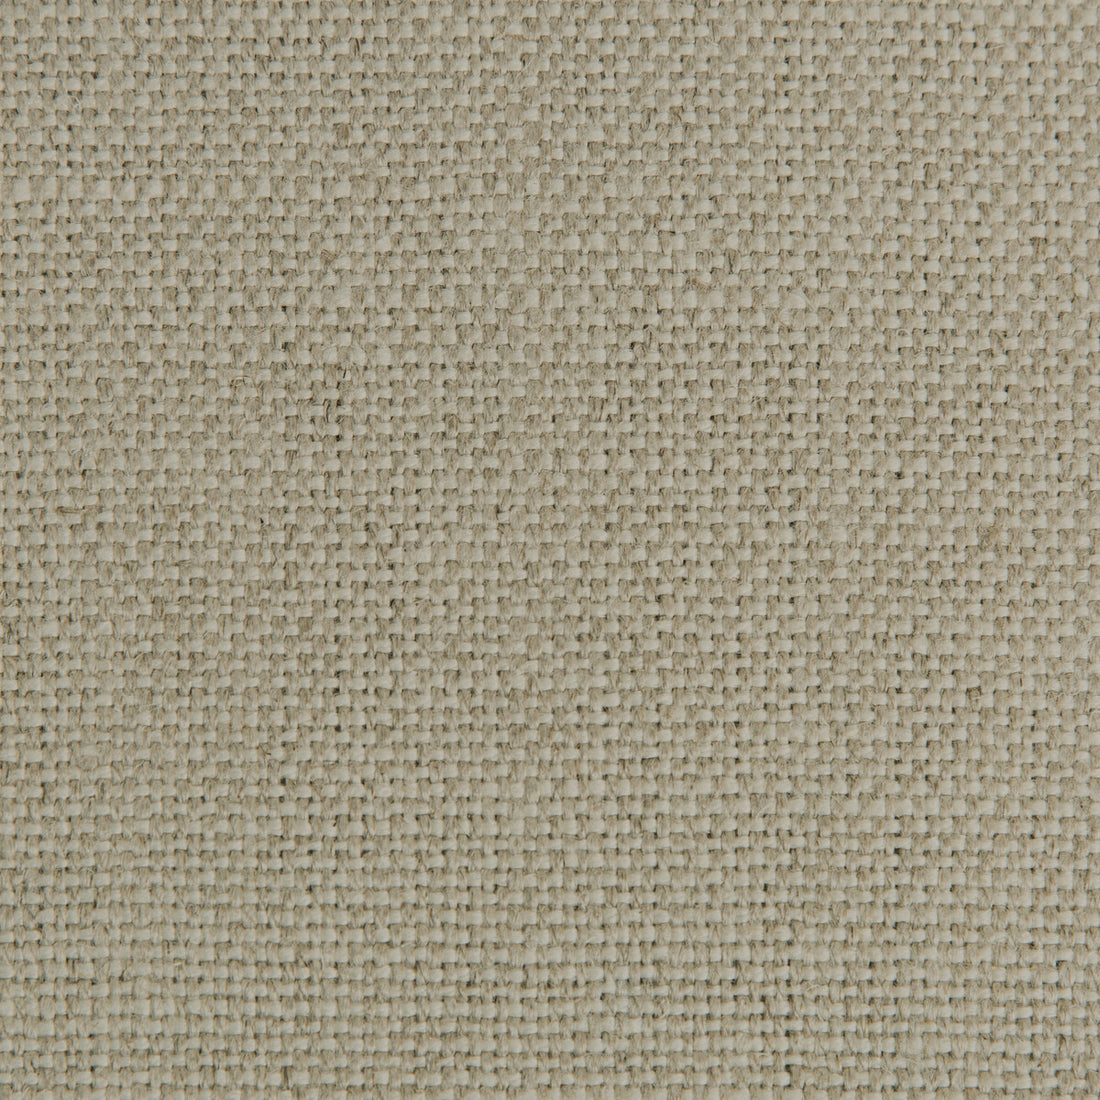 Adriano fabric in dune color - pattern 33725.161.0 - by Kravet Basics in the Jeffrey Alan Marks collection